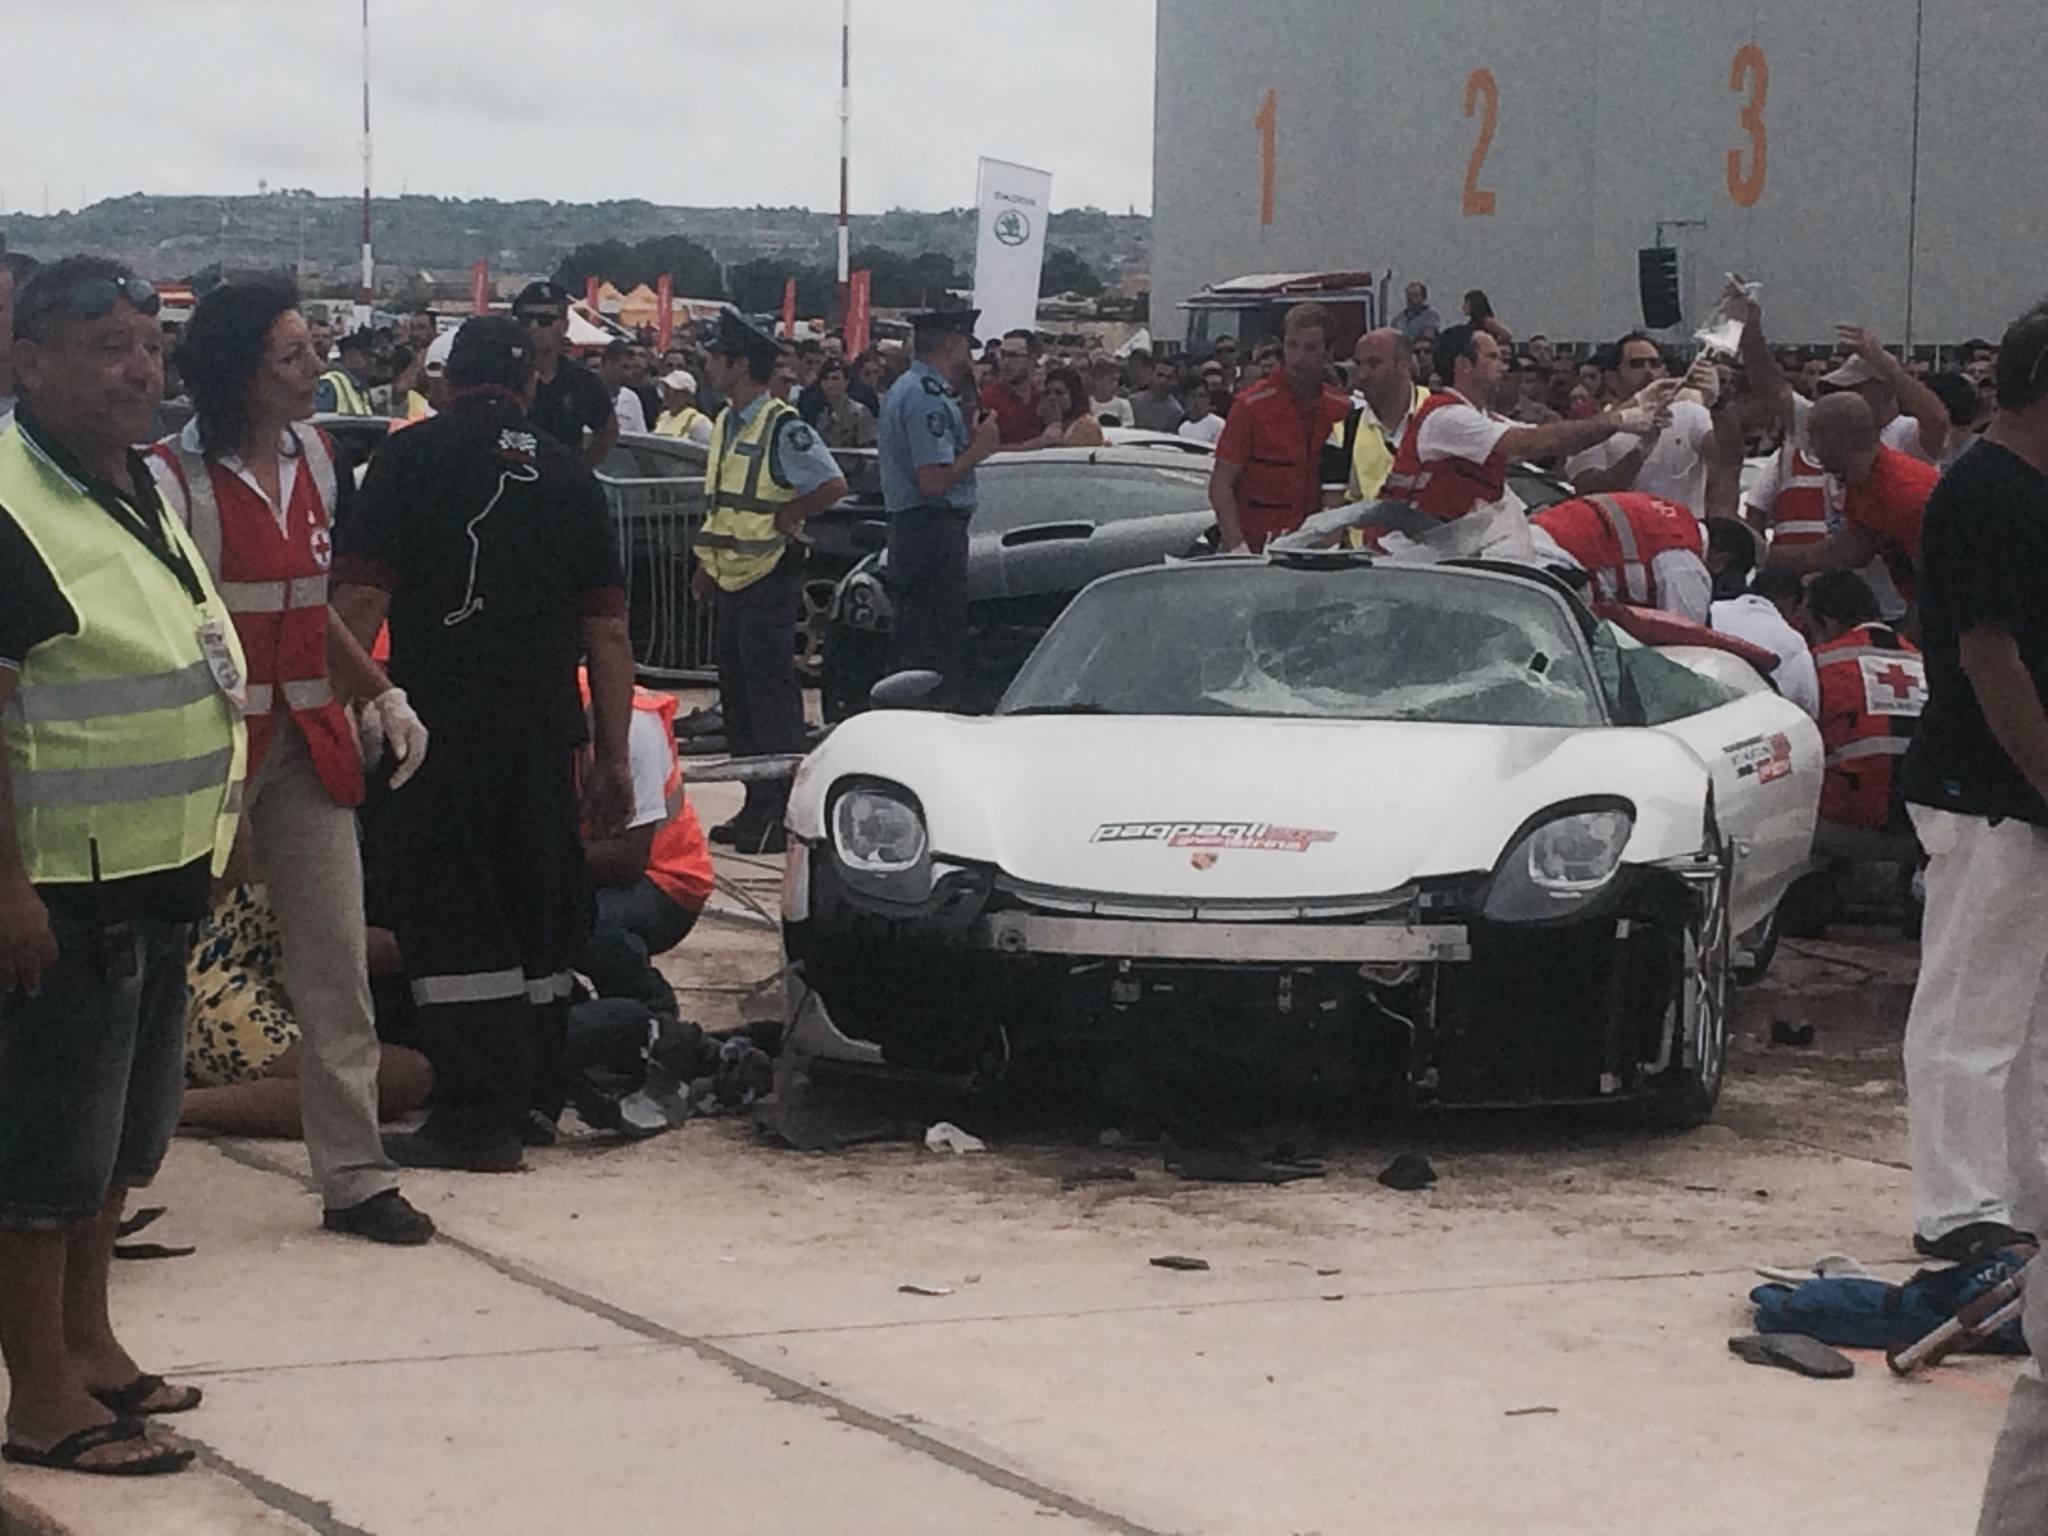 26 People Injured After Porsche 918 Crashed Into Spectators At Supercar Event In Malta Autoevolution